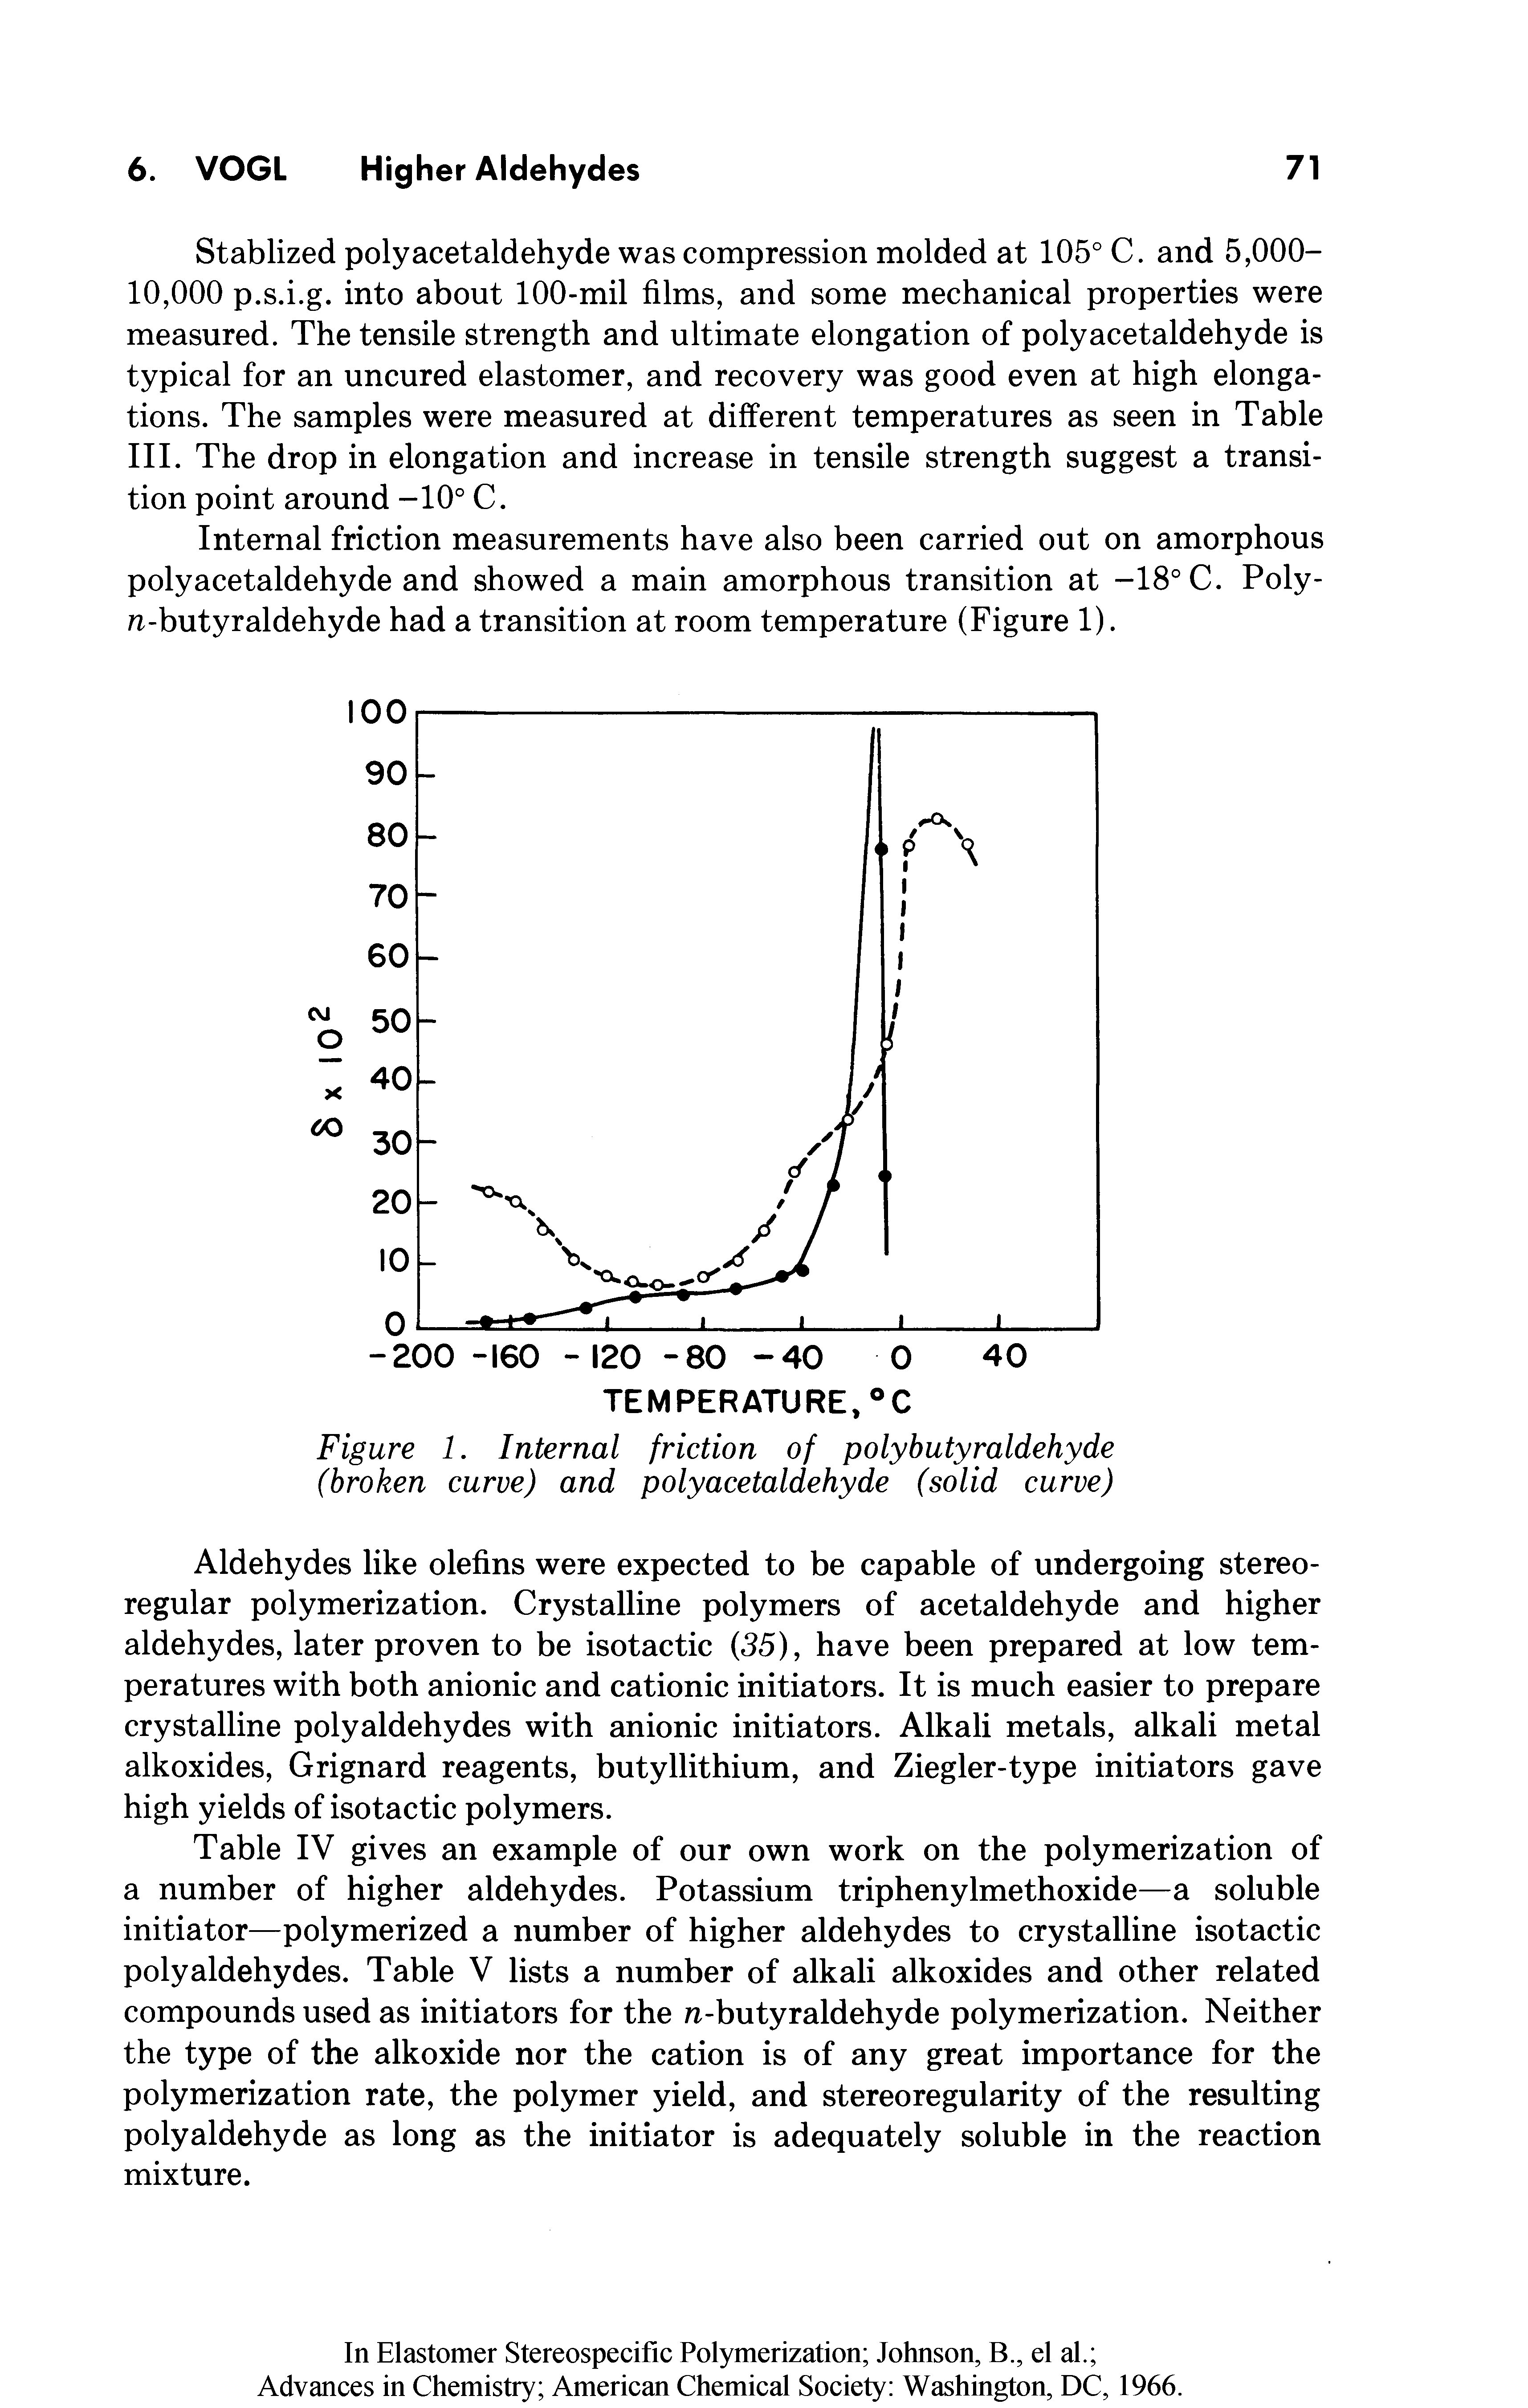 Table IV gives an example of our own work on the polymerization of a number of higher aldehydes. Potassium triphenylmethoxide—a soluble initiator—polymerized a number of higher aldehydes to crystalline isotactic poly aldehydes. Table V lists a number of alkali alkoxides and other related compounds used as initiators for the n-butyraldehyde polymerization. Neither the type of the alkoxide nor the cation is of any great importance for the polymerization rate, the polymer yield, and stereoregularity of the resulting polyaldehyde as long as the initiator is adequately soluble in the reaction mixture.